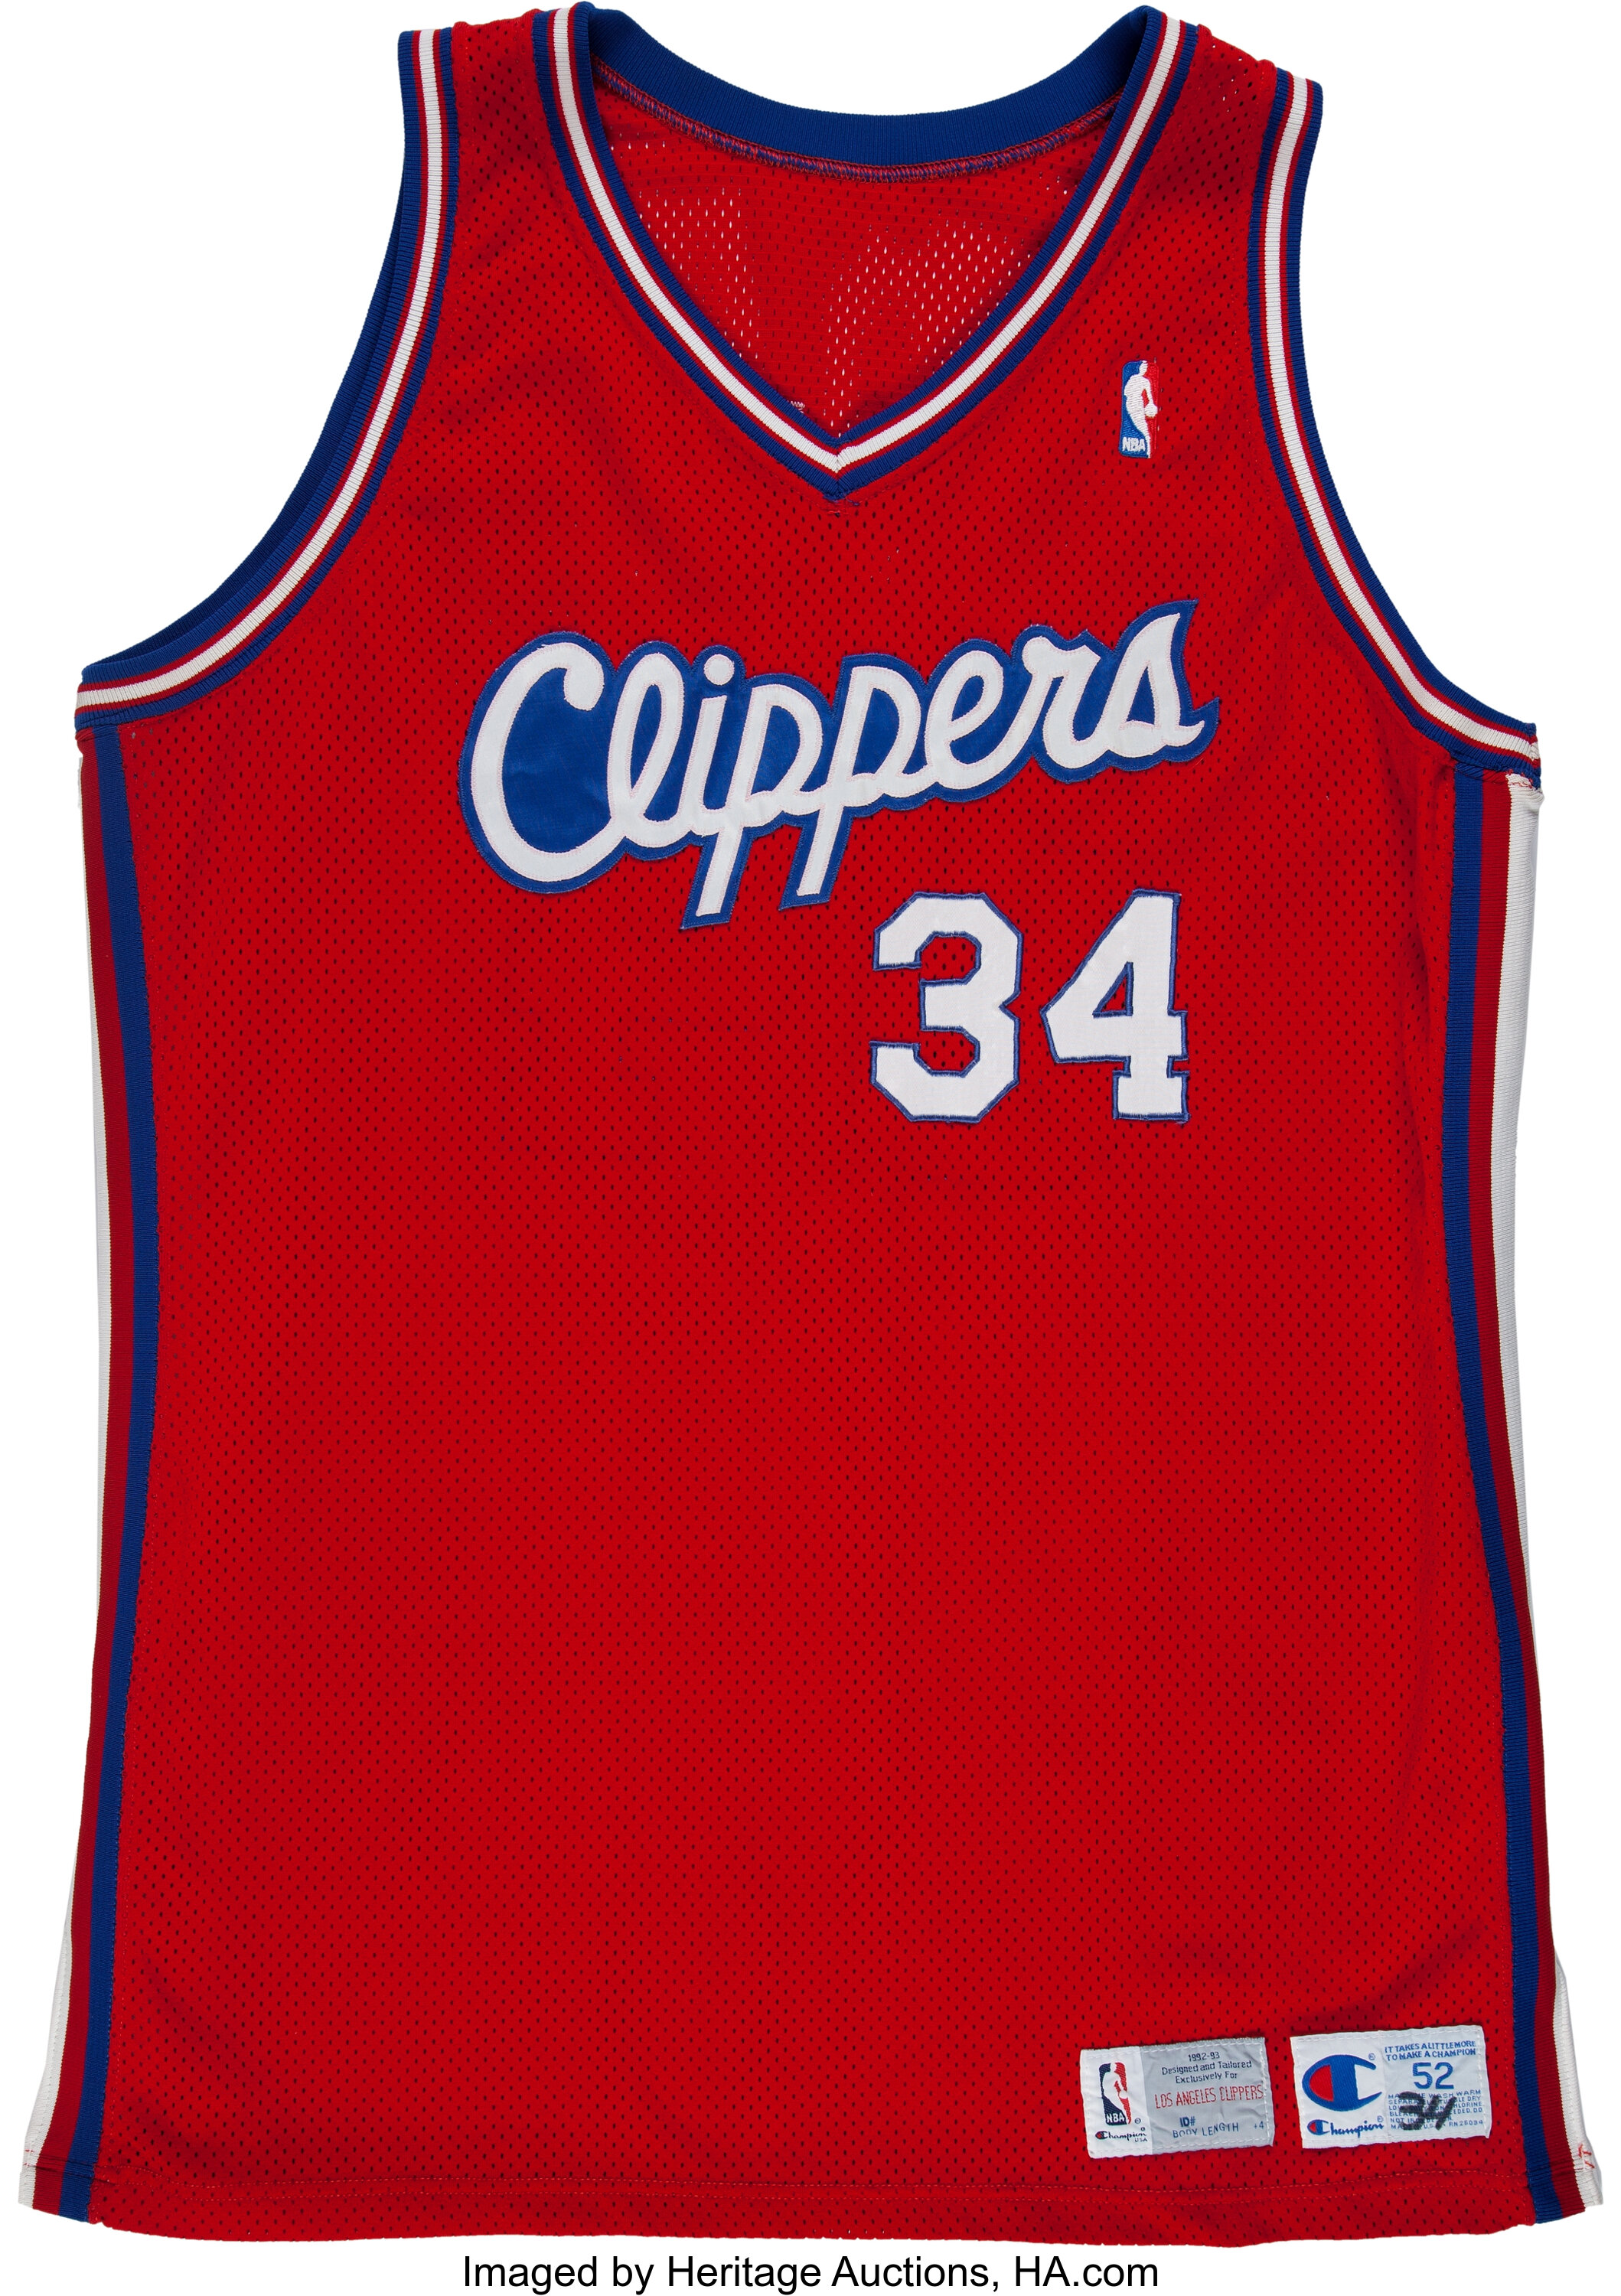 Los Angeles Clippers Jersey History - Basketball Jersey Archive